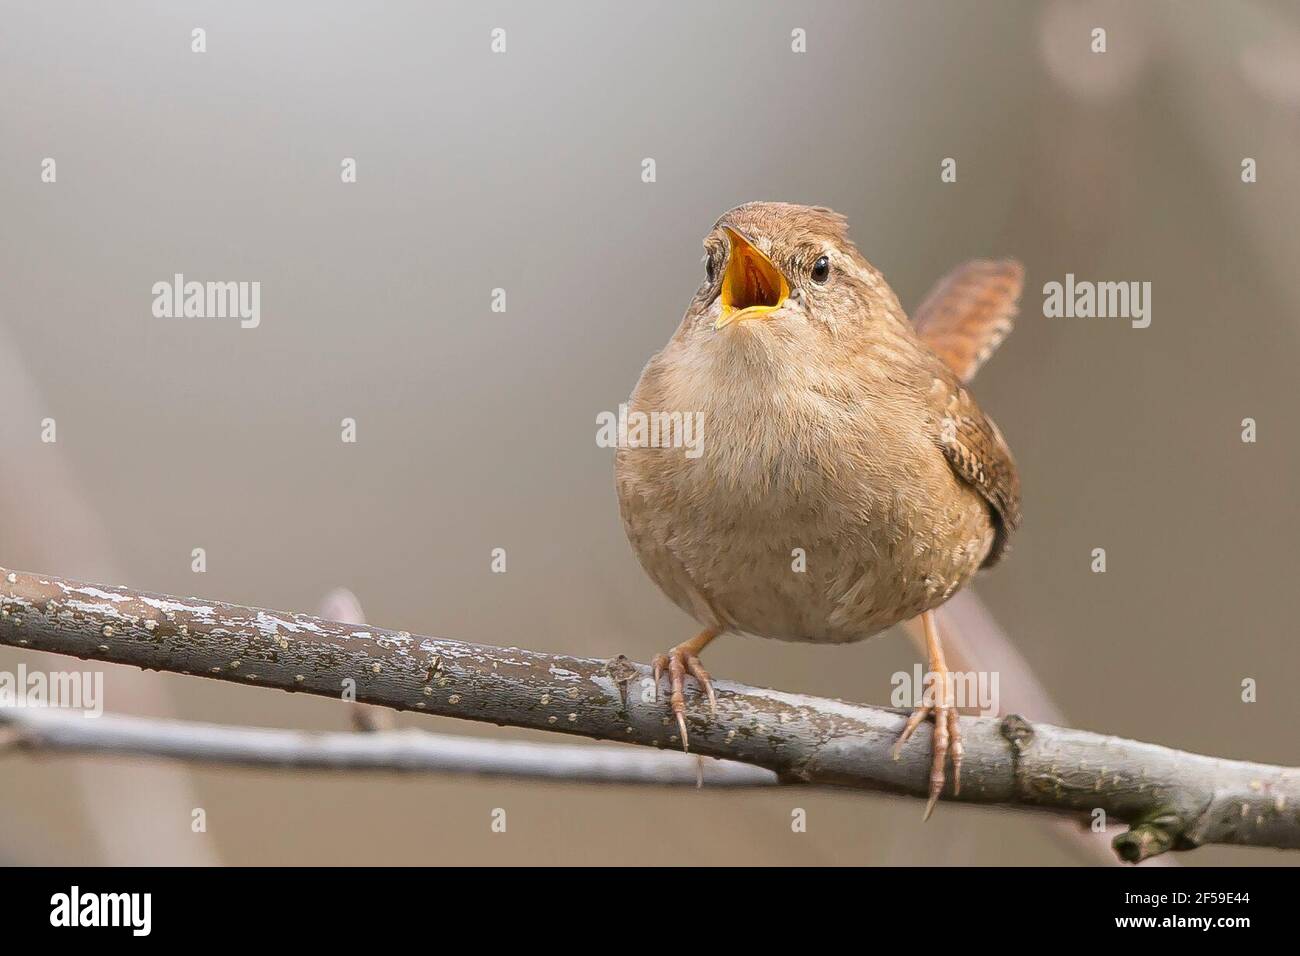 Kidderminster, UK. 25th March, 2021. UK weather: the dawn chorus sung by this tiny wren bird, one of the UK's smallest birds, seems to have the right effect on the weather today as glorious sunshine and warmer temperatures have followed. Credit: Lee Hudson/Alamy Live News Stock Photo